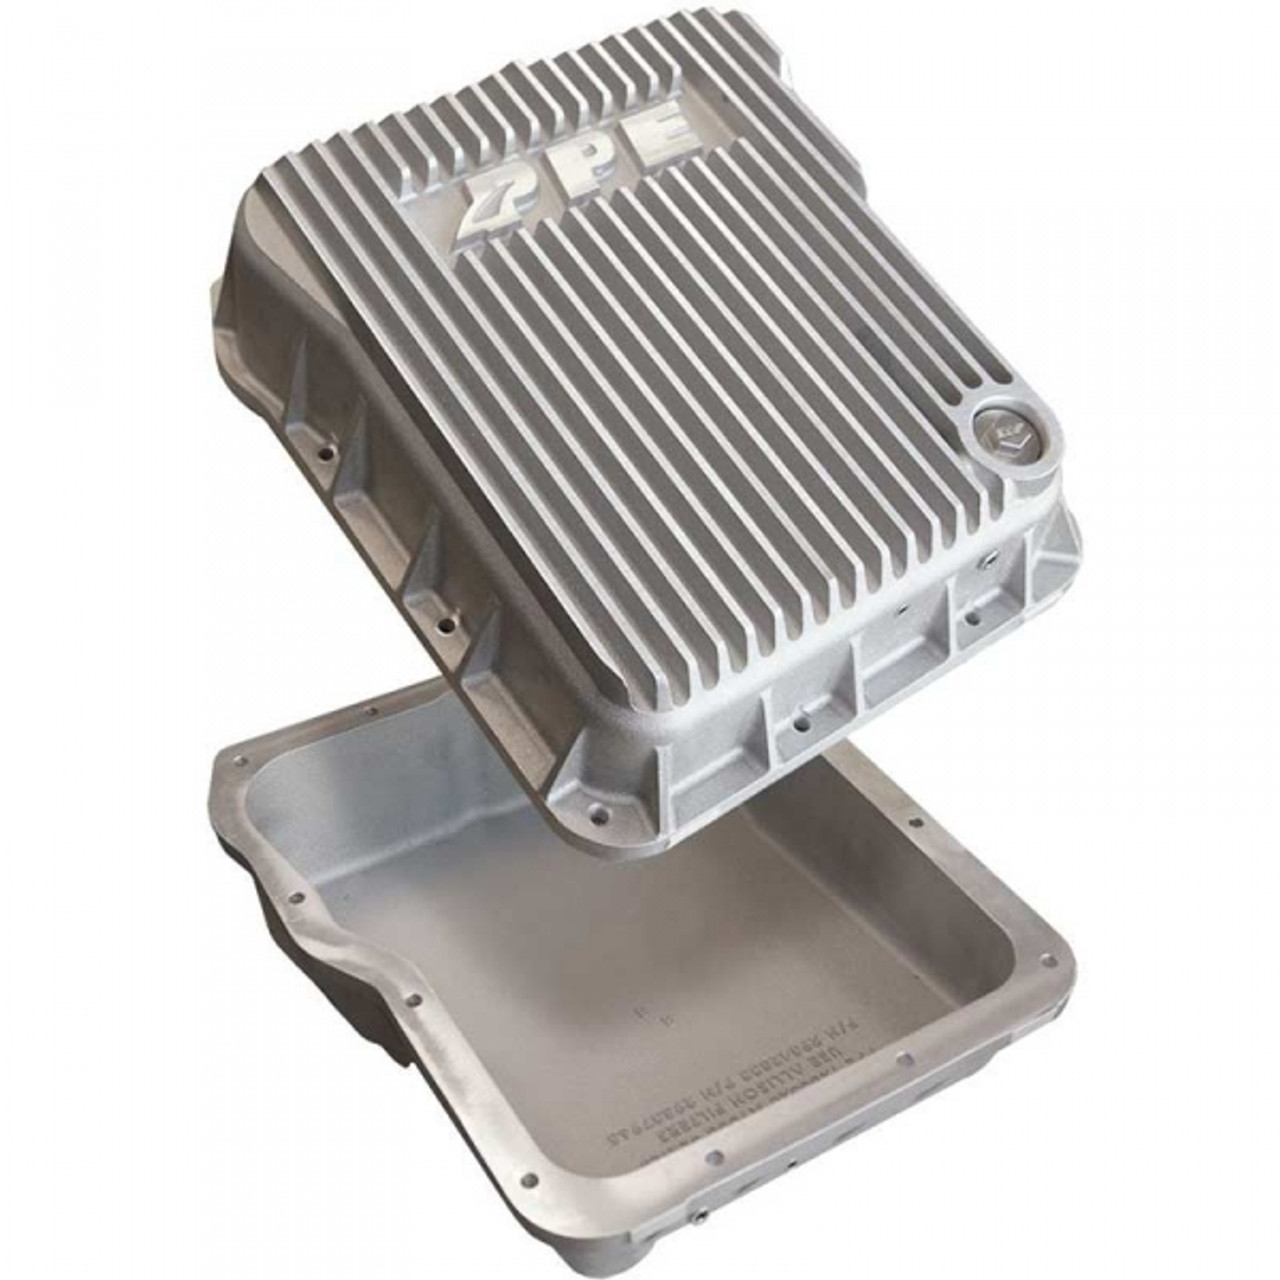  PPE LOW PROFILE ALUMINUM TRANSMISSION PAN 2001-2019 GM 6.6L DURAMAX (EQUIPPED WITH ALLISON 1000 / 2000 / 2400)Raw View